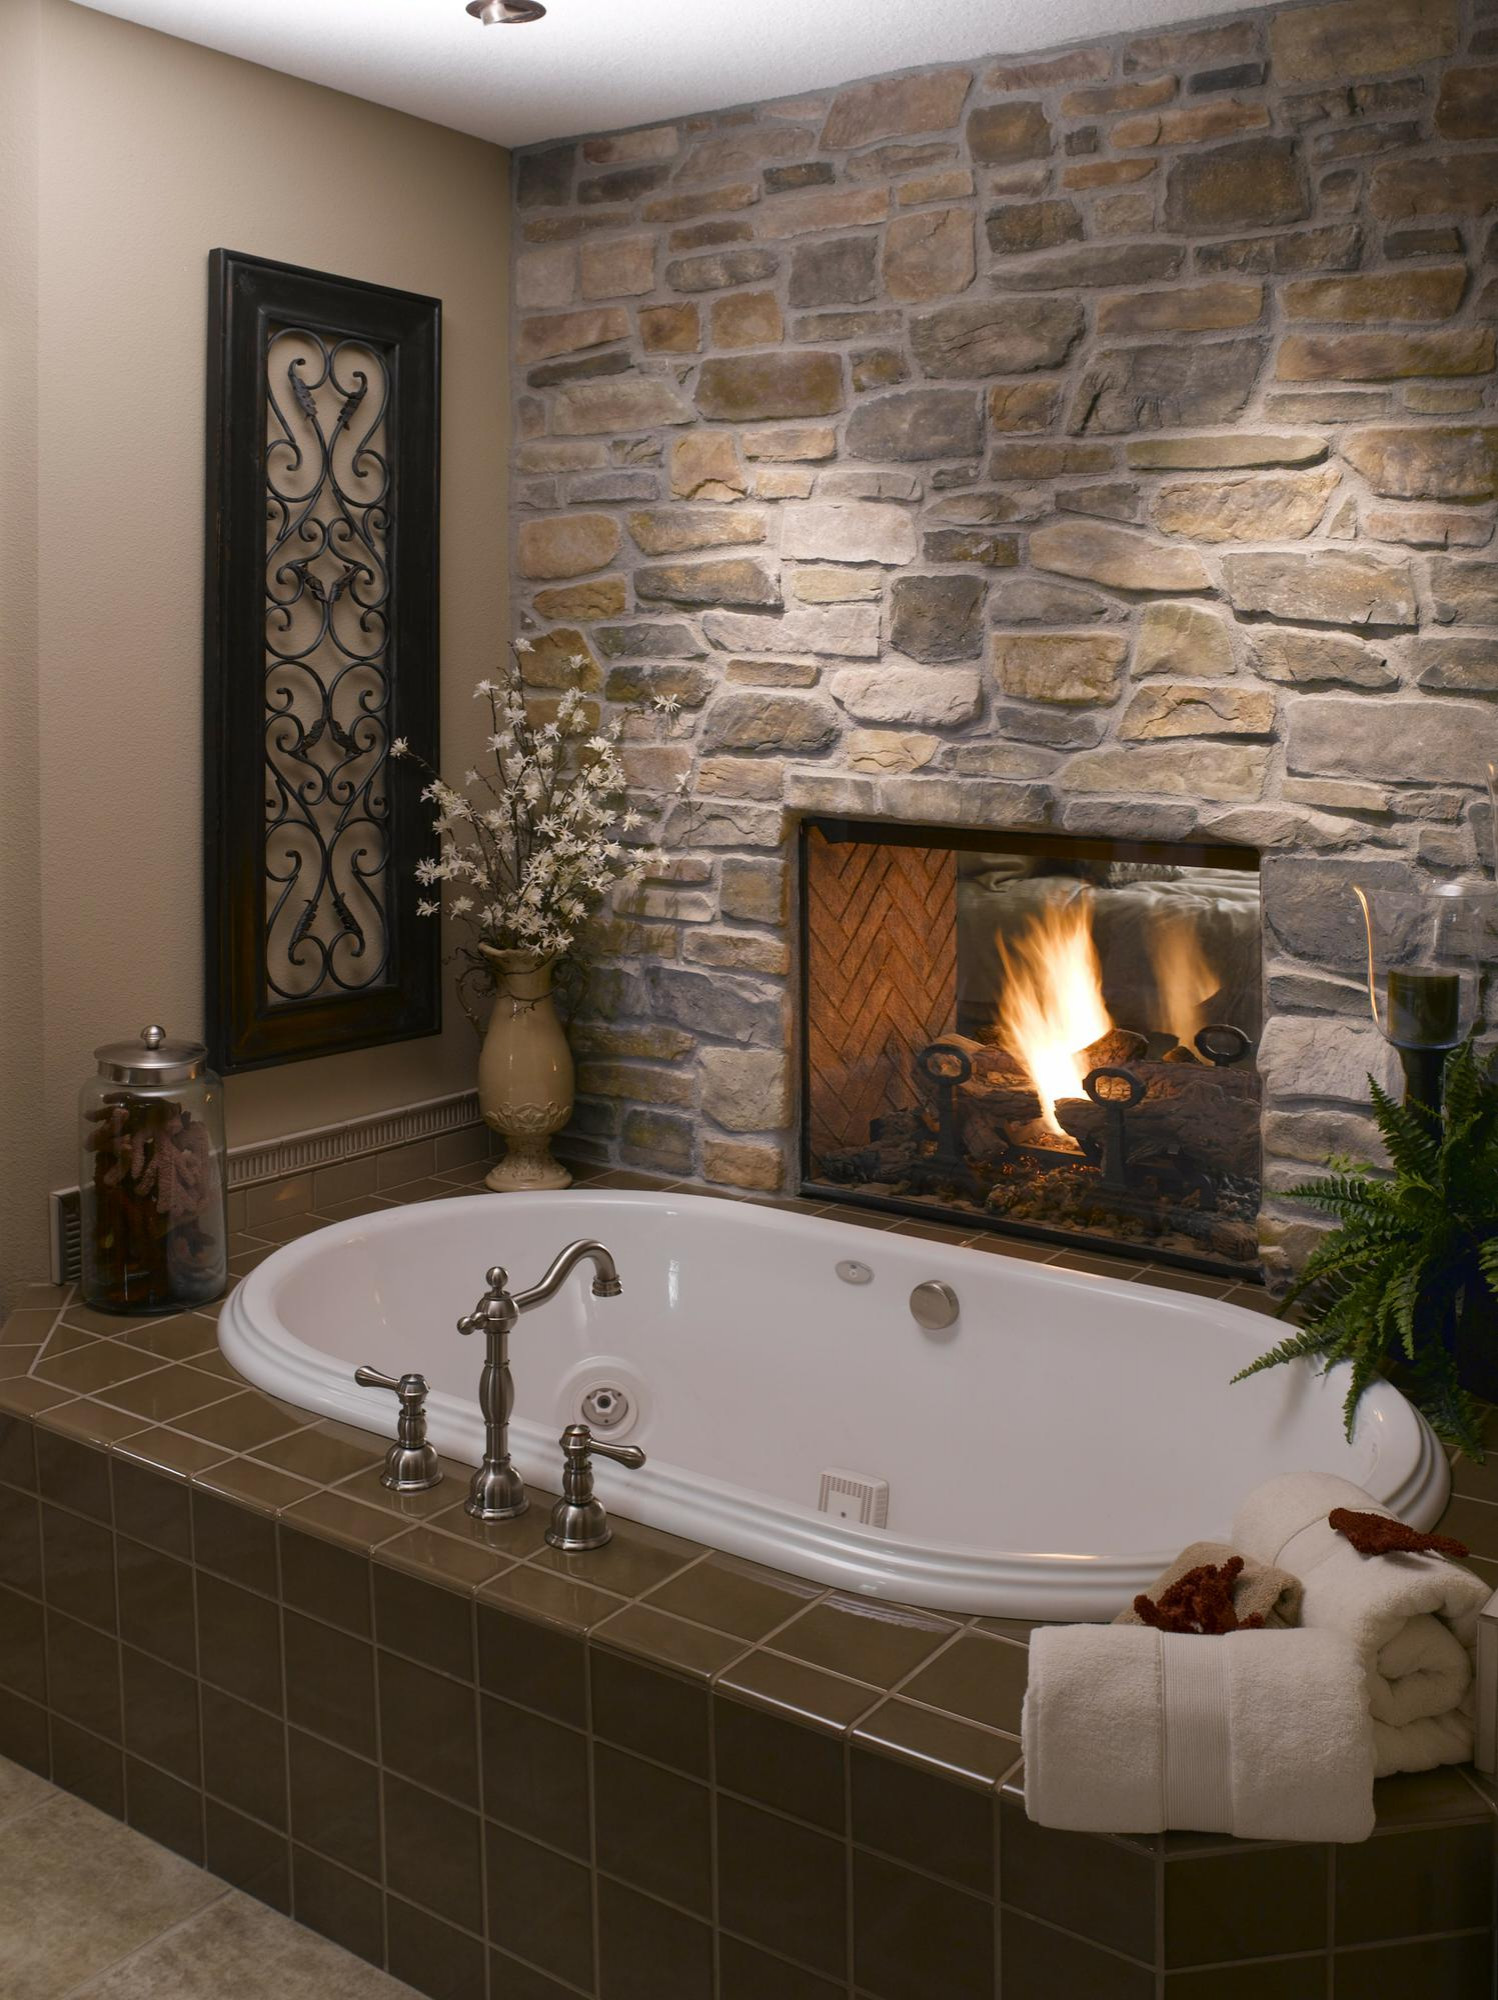  Rustic bathroom with stone fireplace